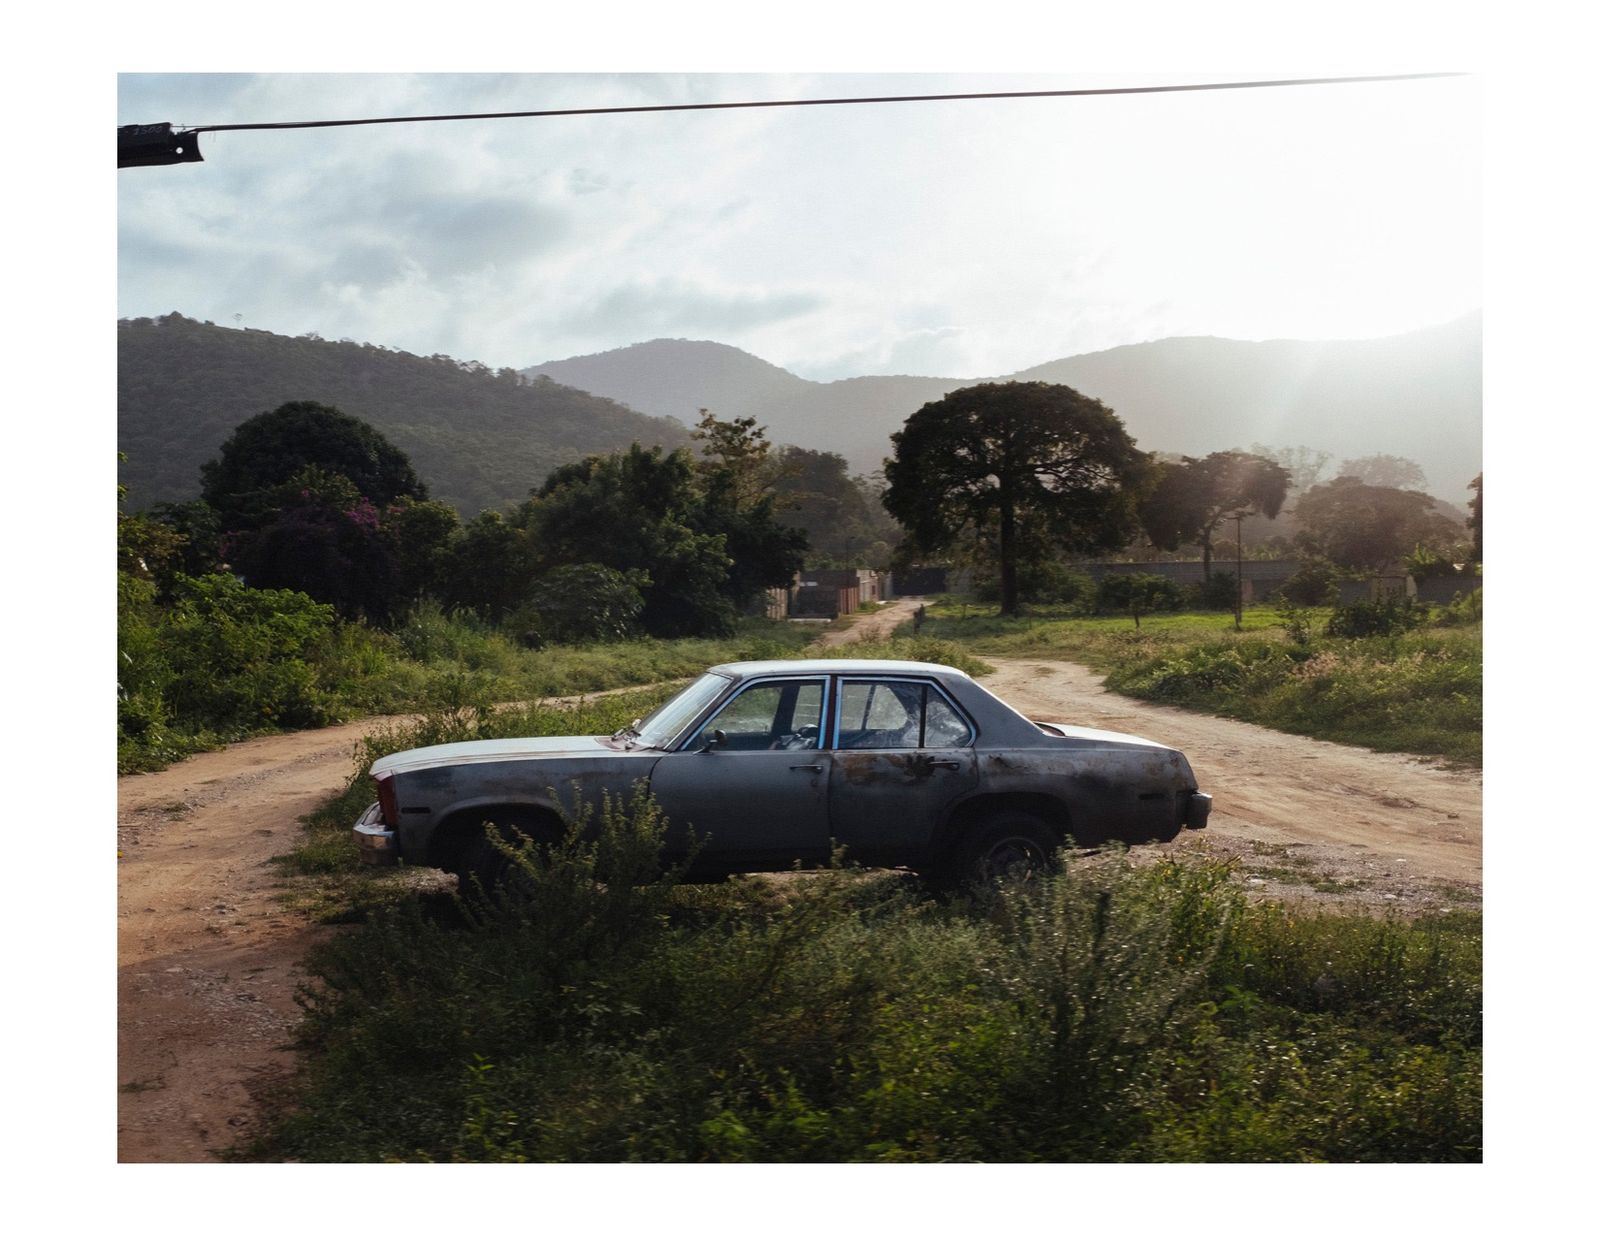 © Andrea Hernández Briceño - A parked vehicle in the middle of a road in rural town Patanemo, Venezuela, on August 9, 2018